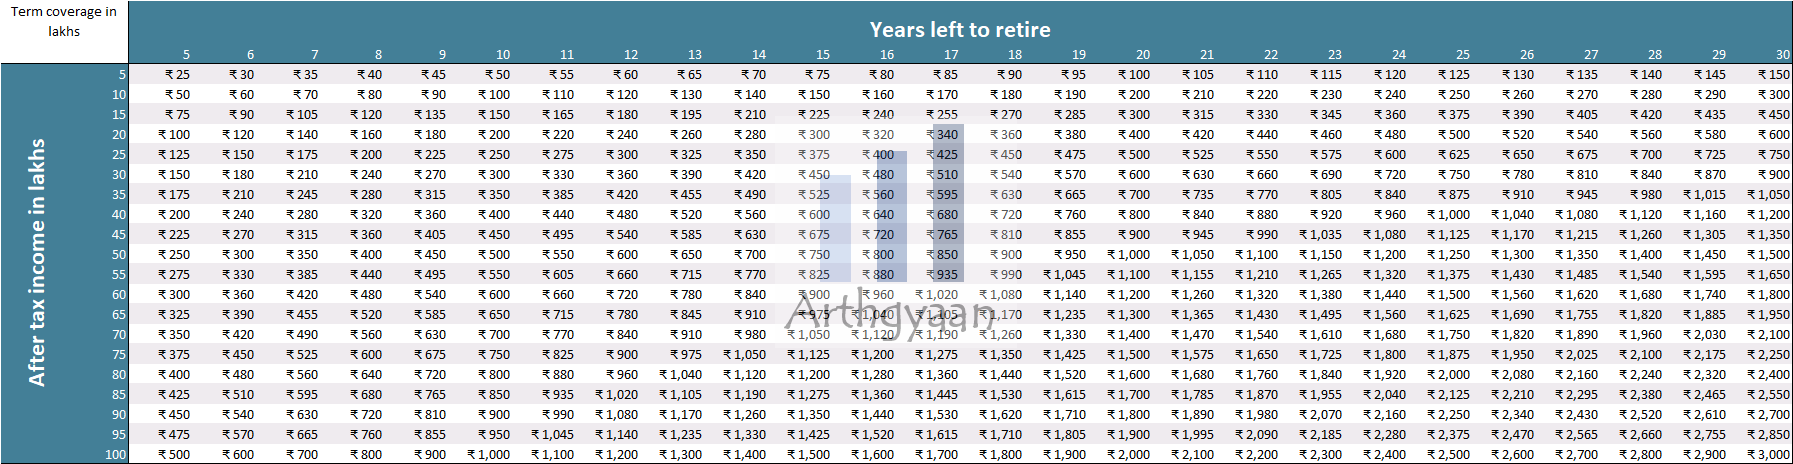 Term insurance coverage amount in lakhs via HLV Income method: real rate = 0%